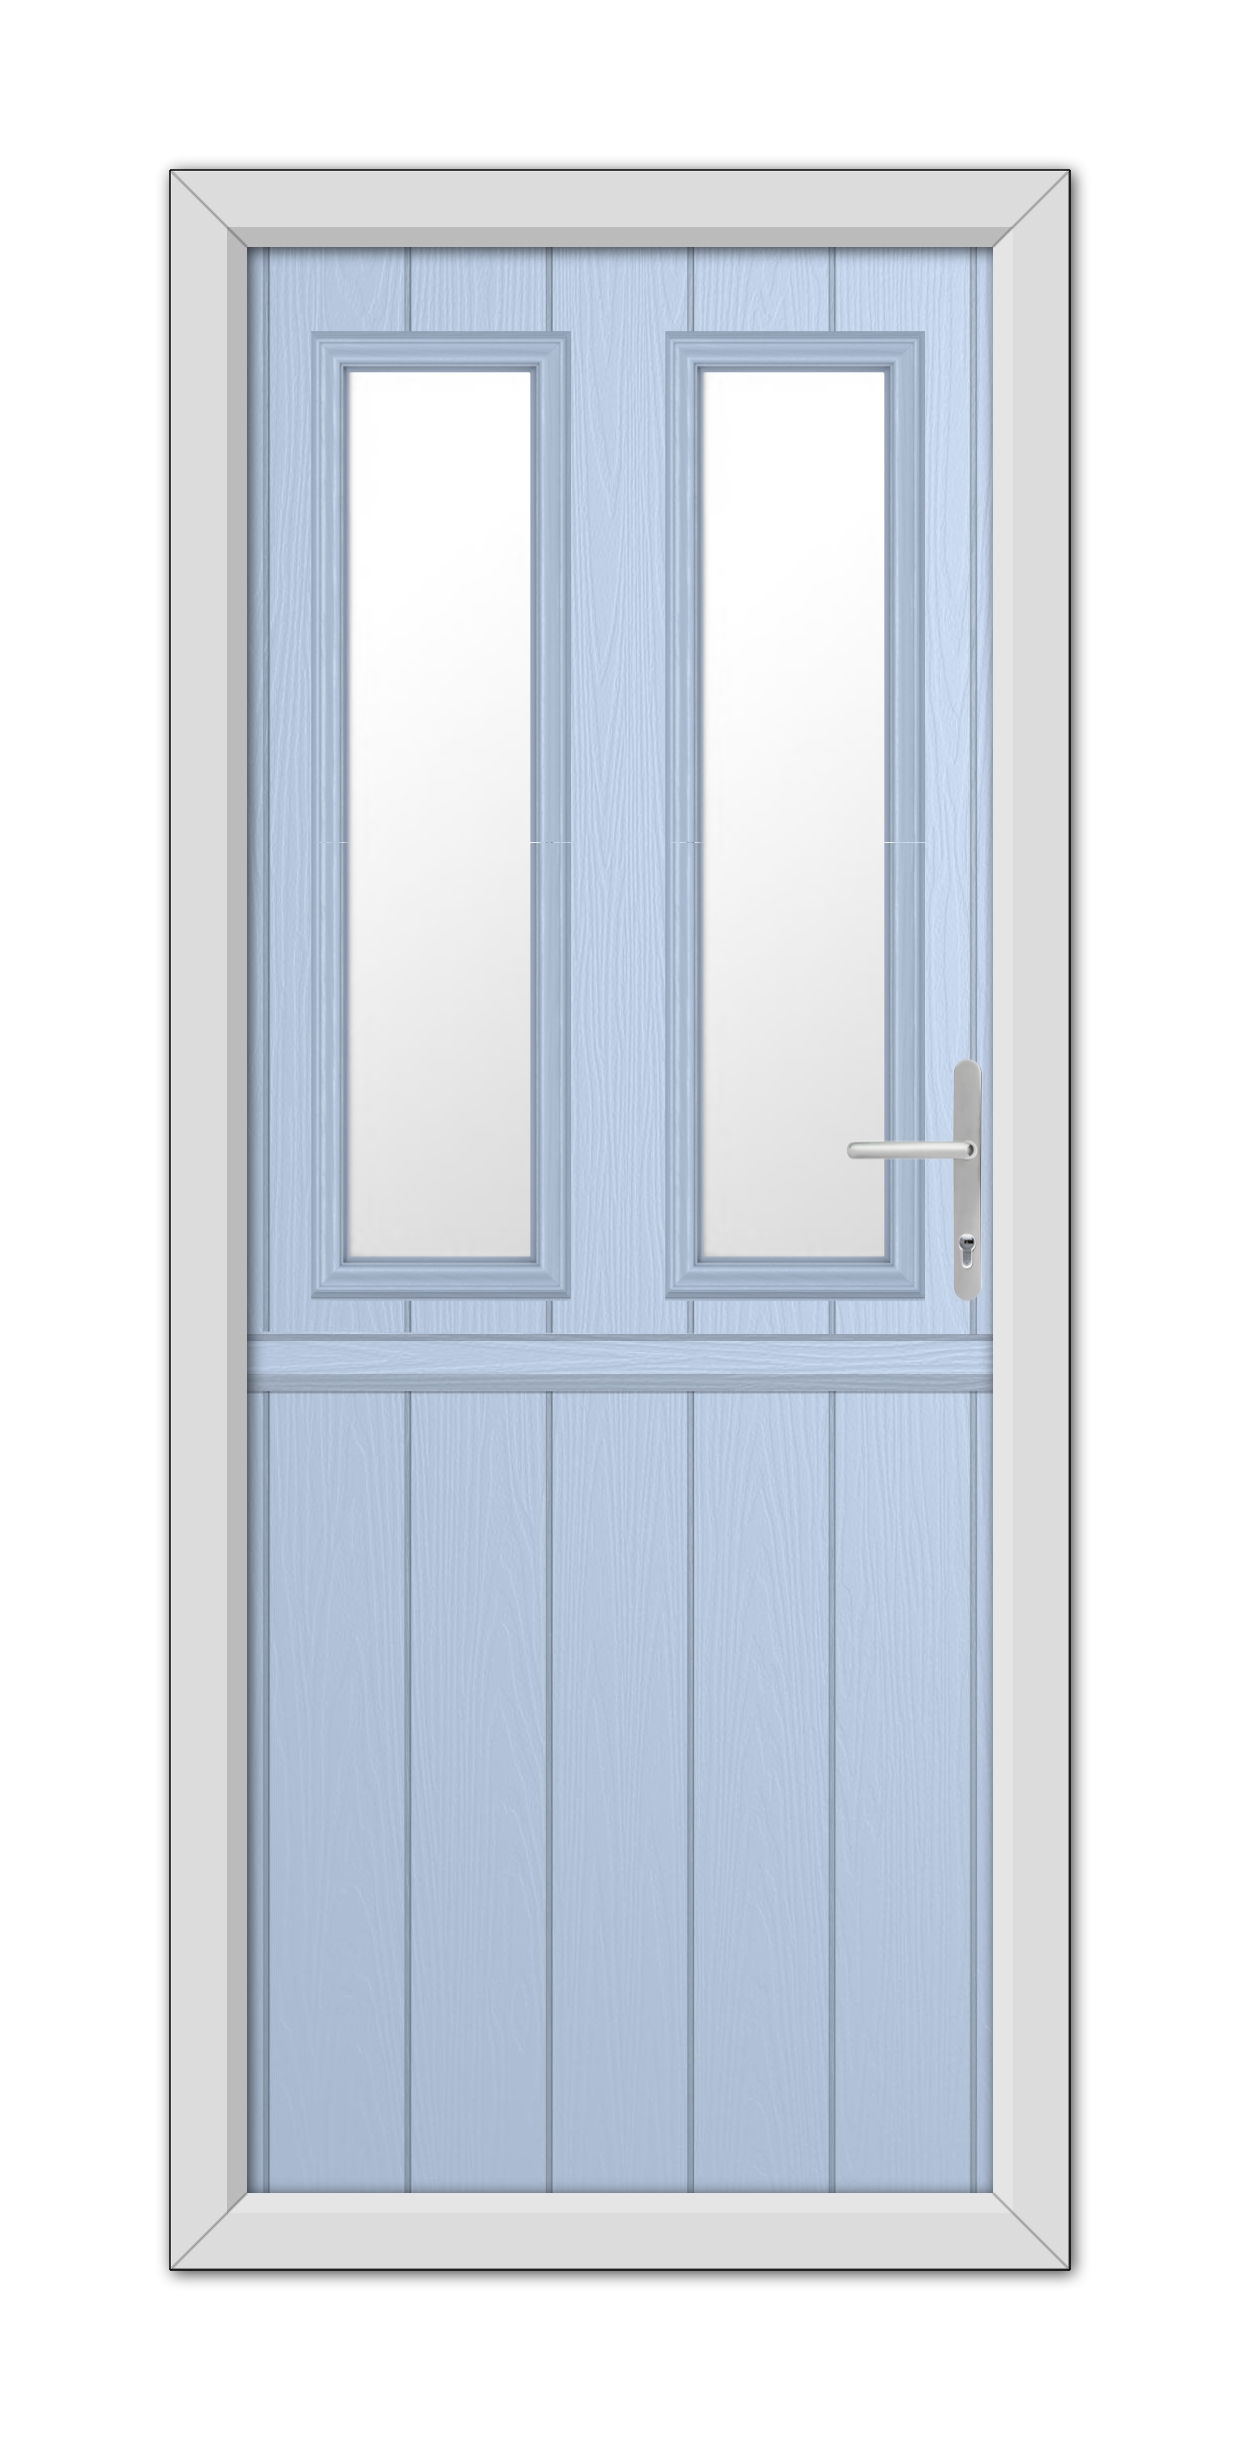 Duck Egg Blue Wellington Stable Composite Door with white frame, featuring upper windows and a modern handle.